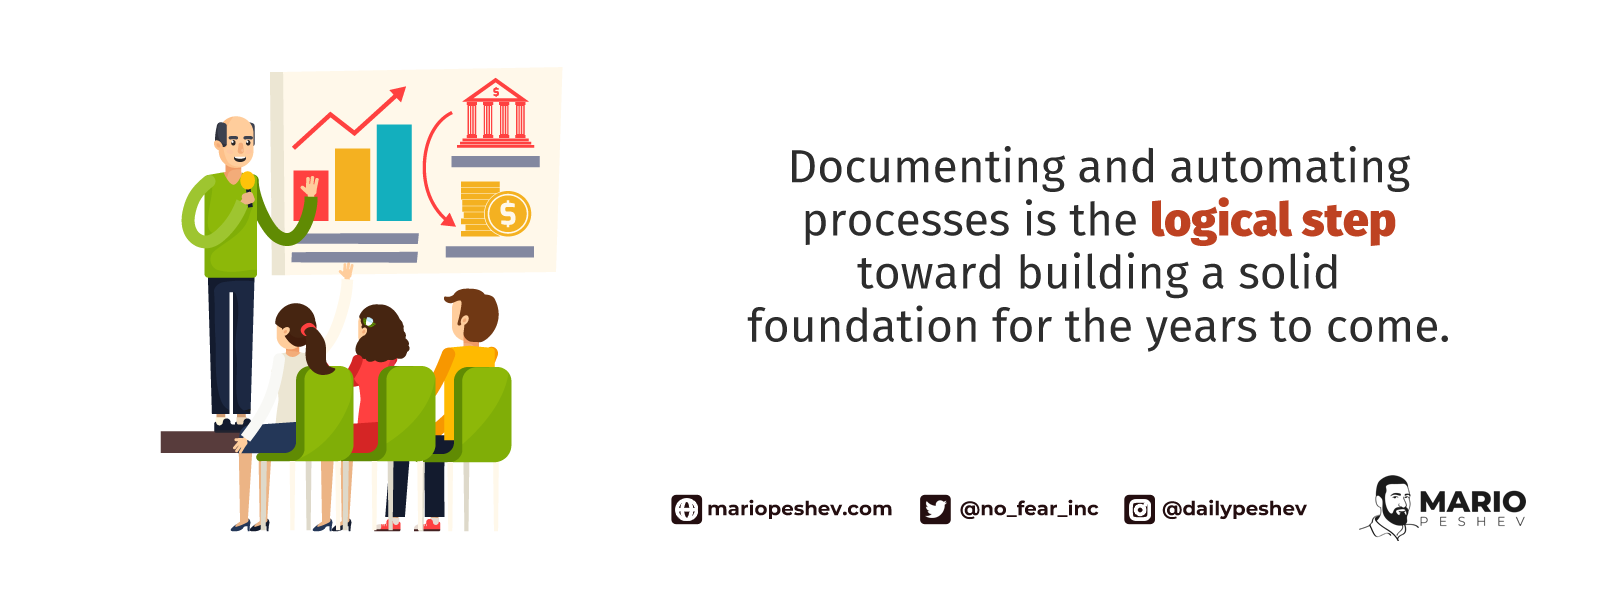 documenting and automating